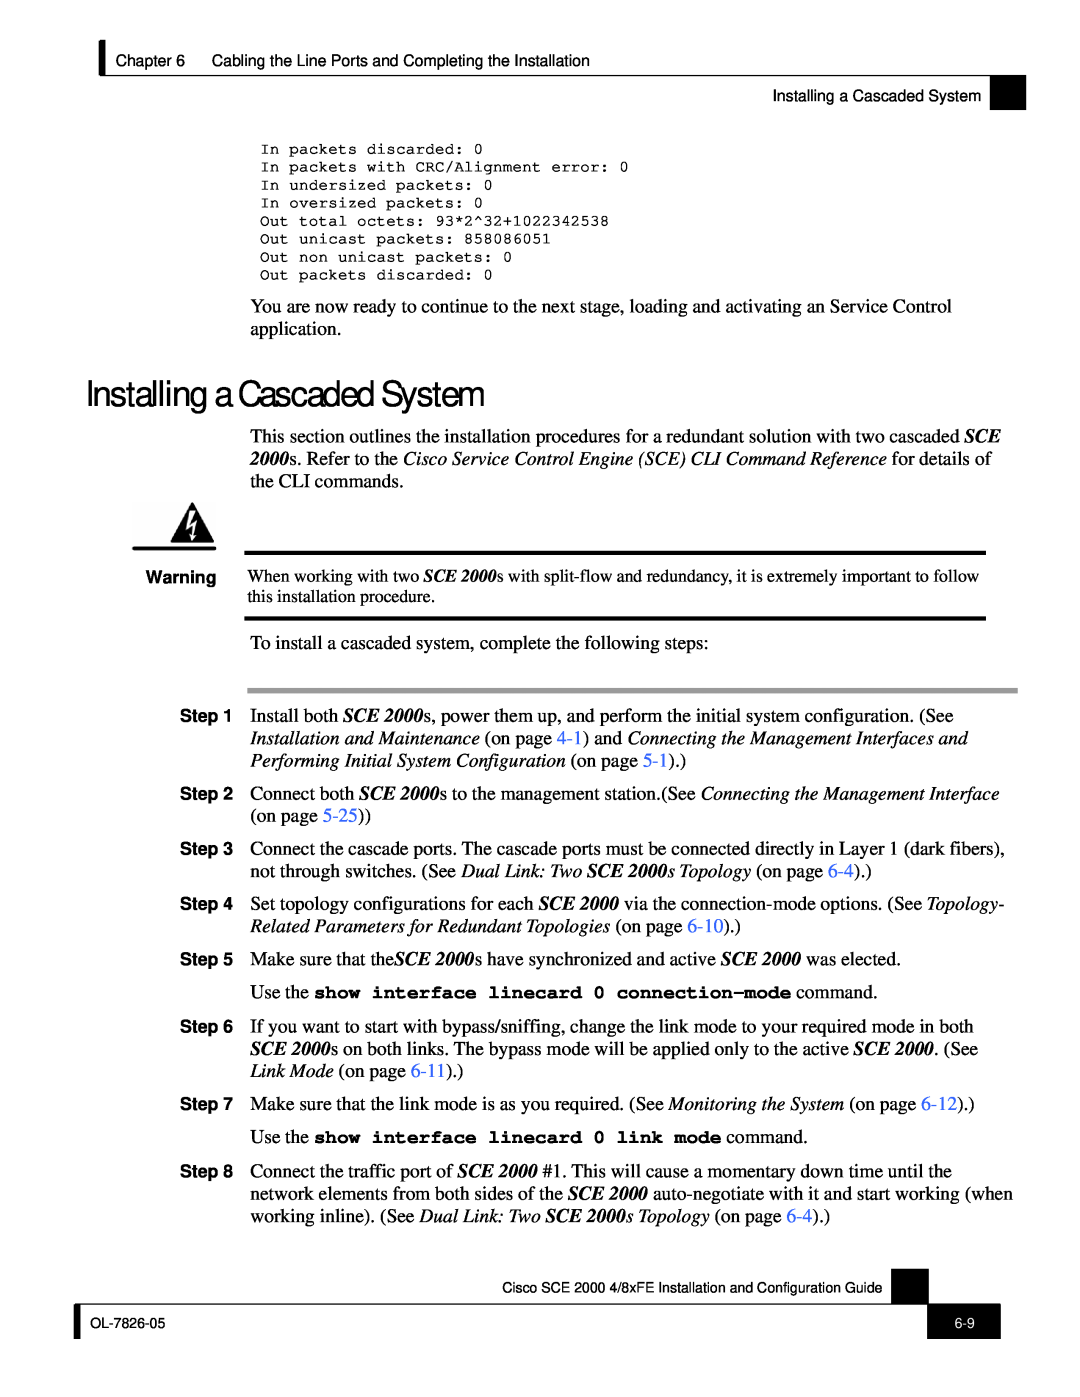 Cisco Systems SCE 2000 4/8xFE Installing a Cascaded System, Use the show interface linecard 0 connection-mode command 